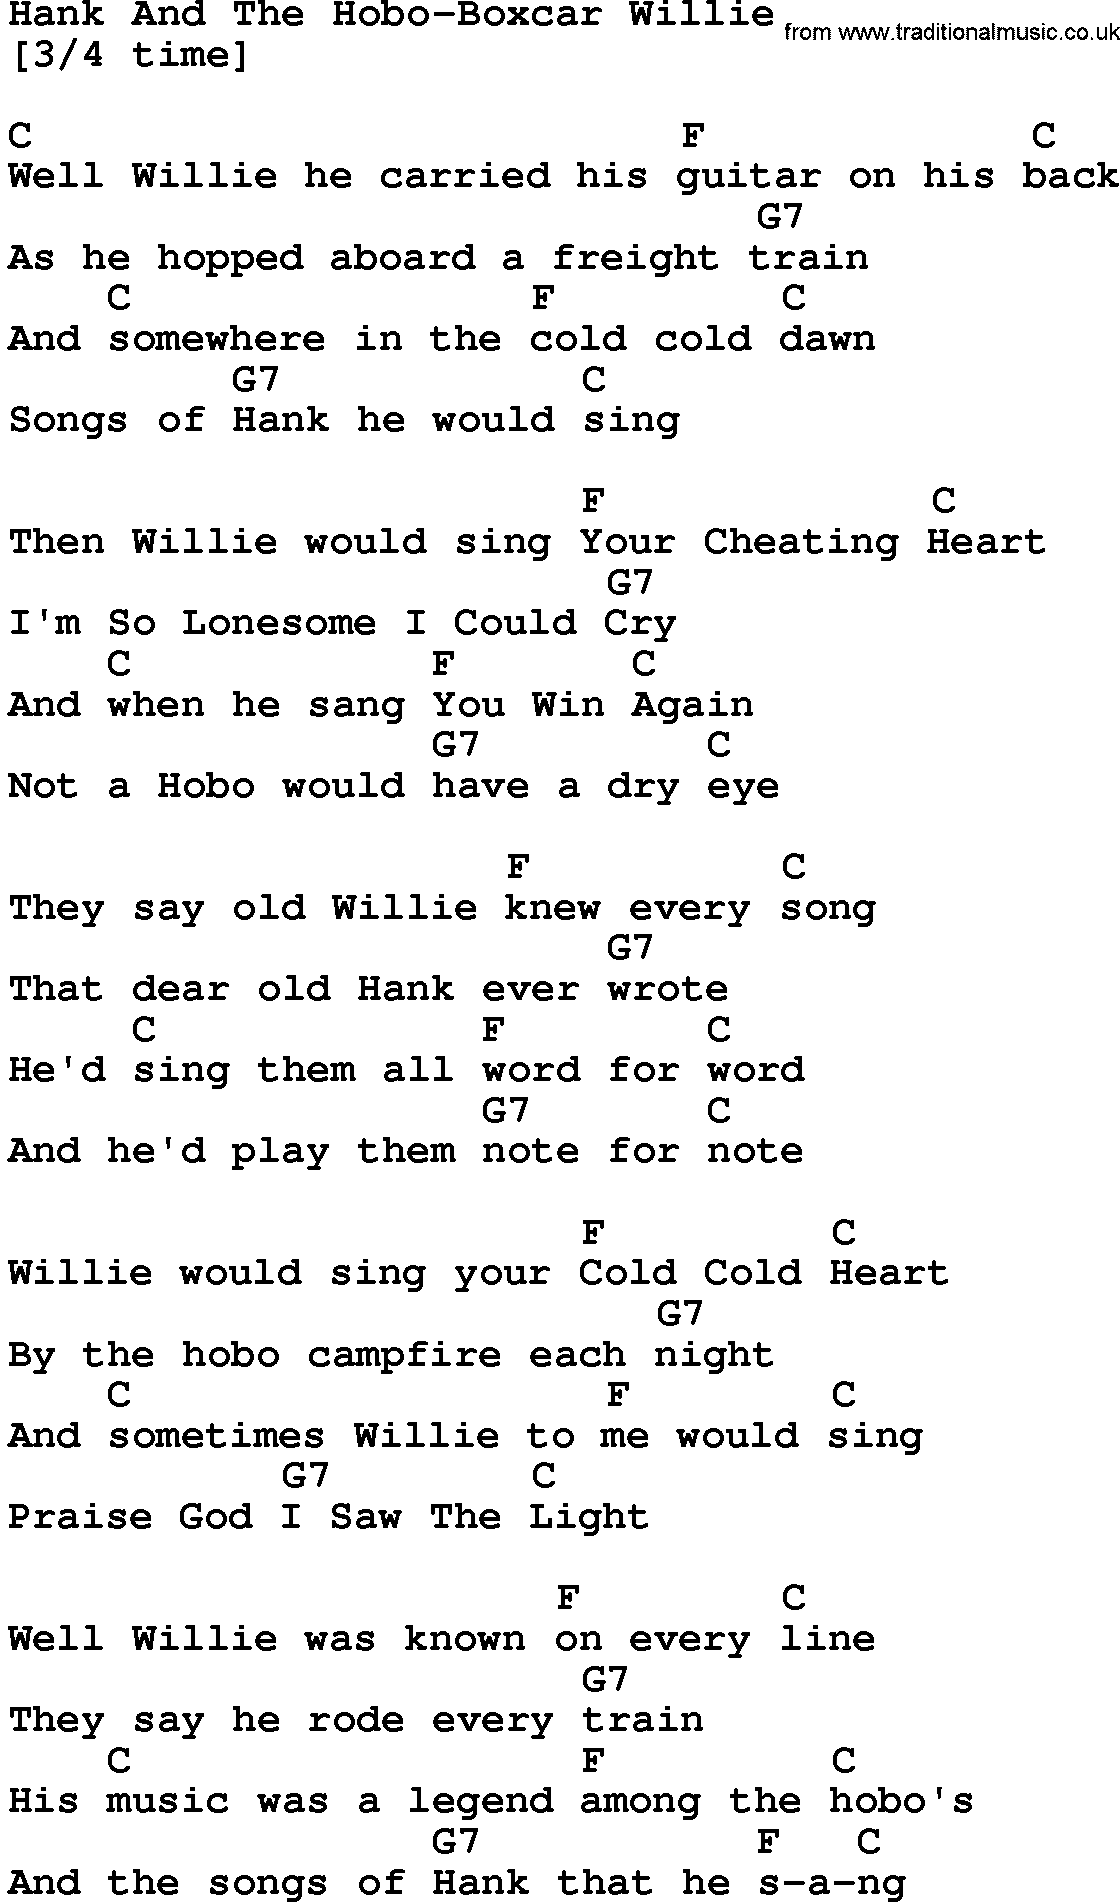 Country music song: Hank And The Hobo-Boxcar Willie lyrics and chords